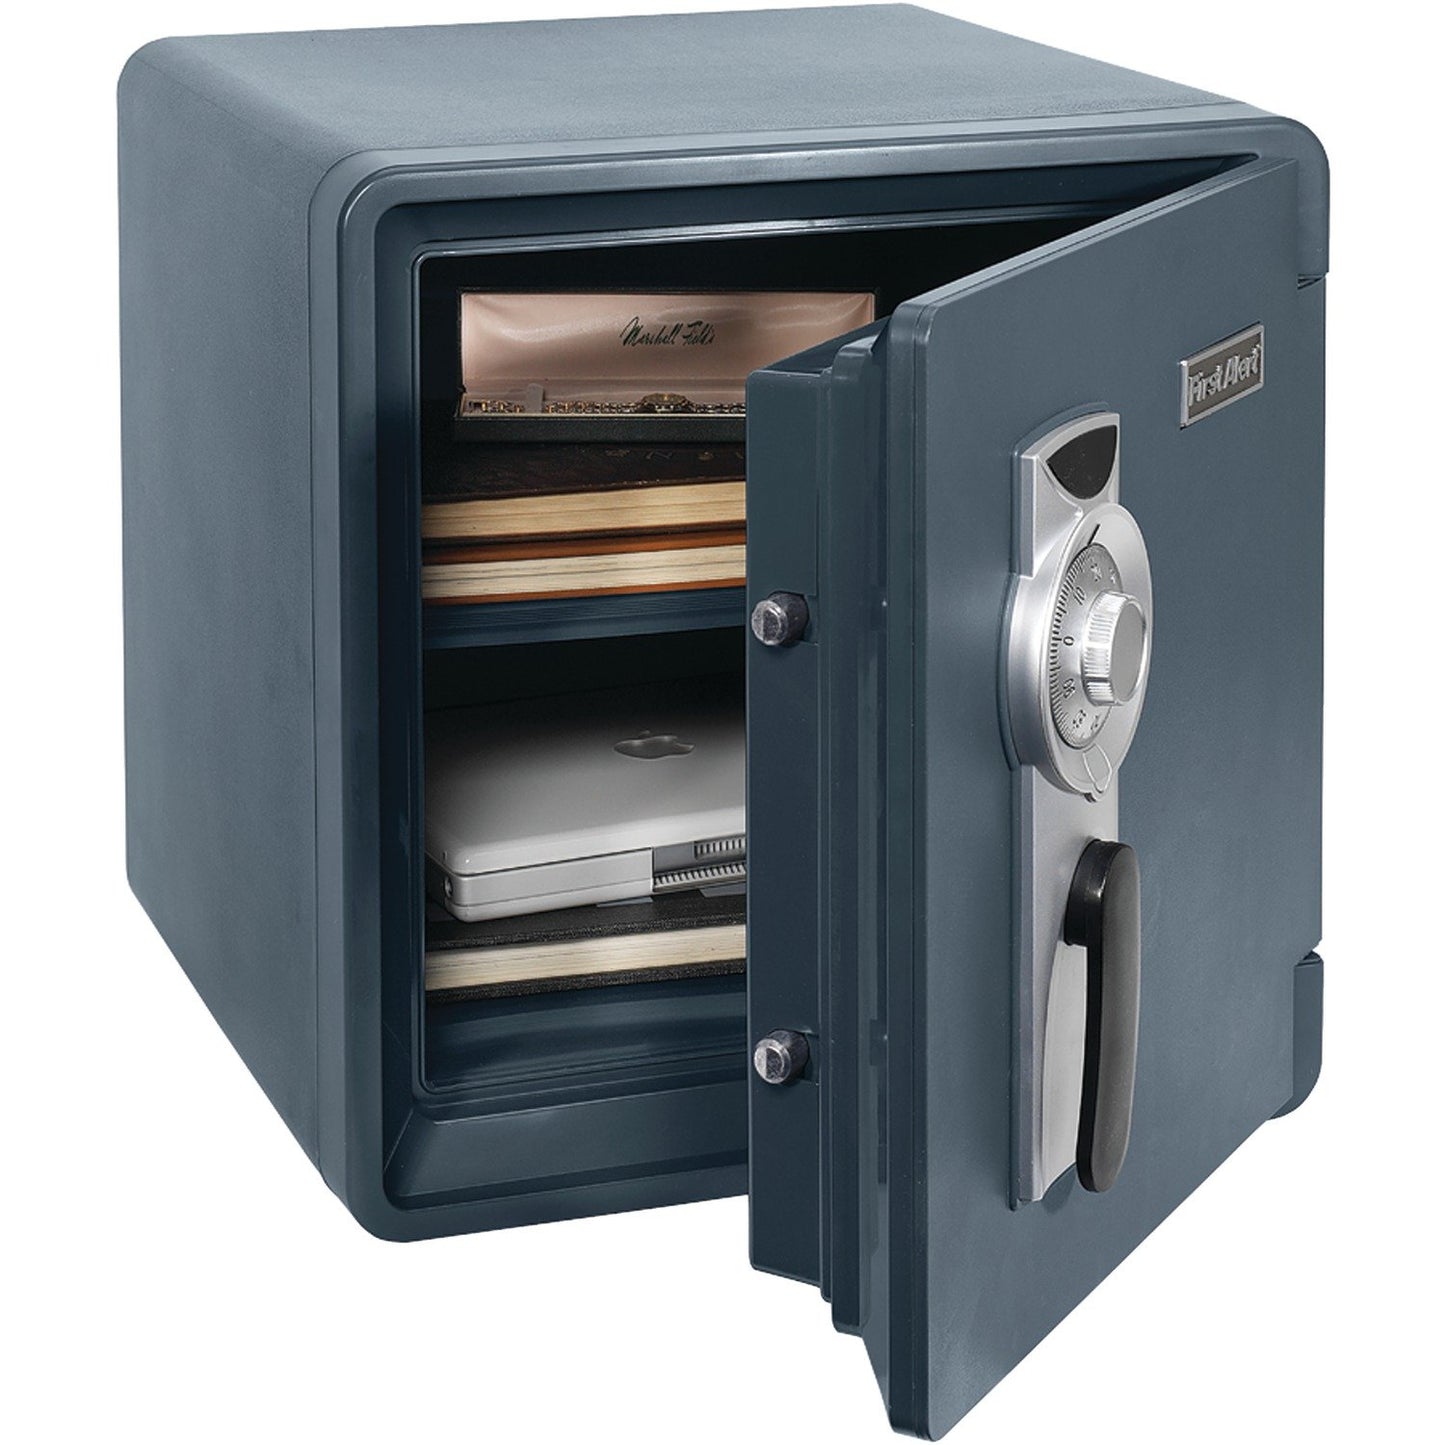 FIRST ALERT FATS2092FBD Waterproof and Fire-Resistant Combo Safe (1.3cuft)